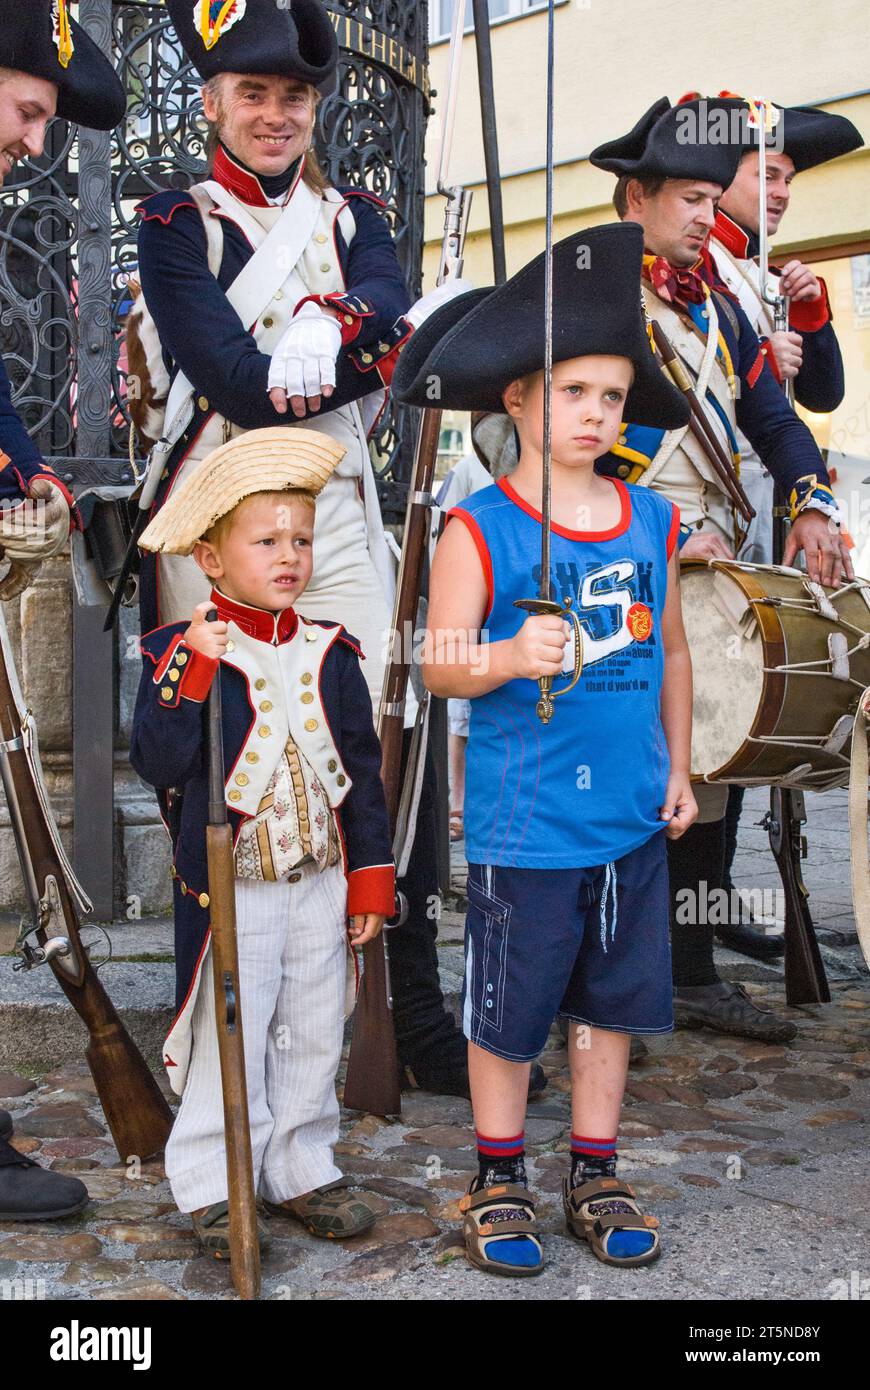 Young boys and reenactors in historic uniforms, city street, Reenactment of the Siege of Neisse during Napoleon War with Prussia in 1807, Nysa, Poland Stock Photo